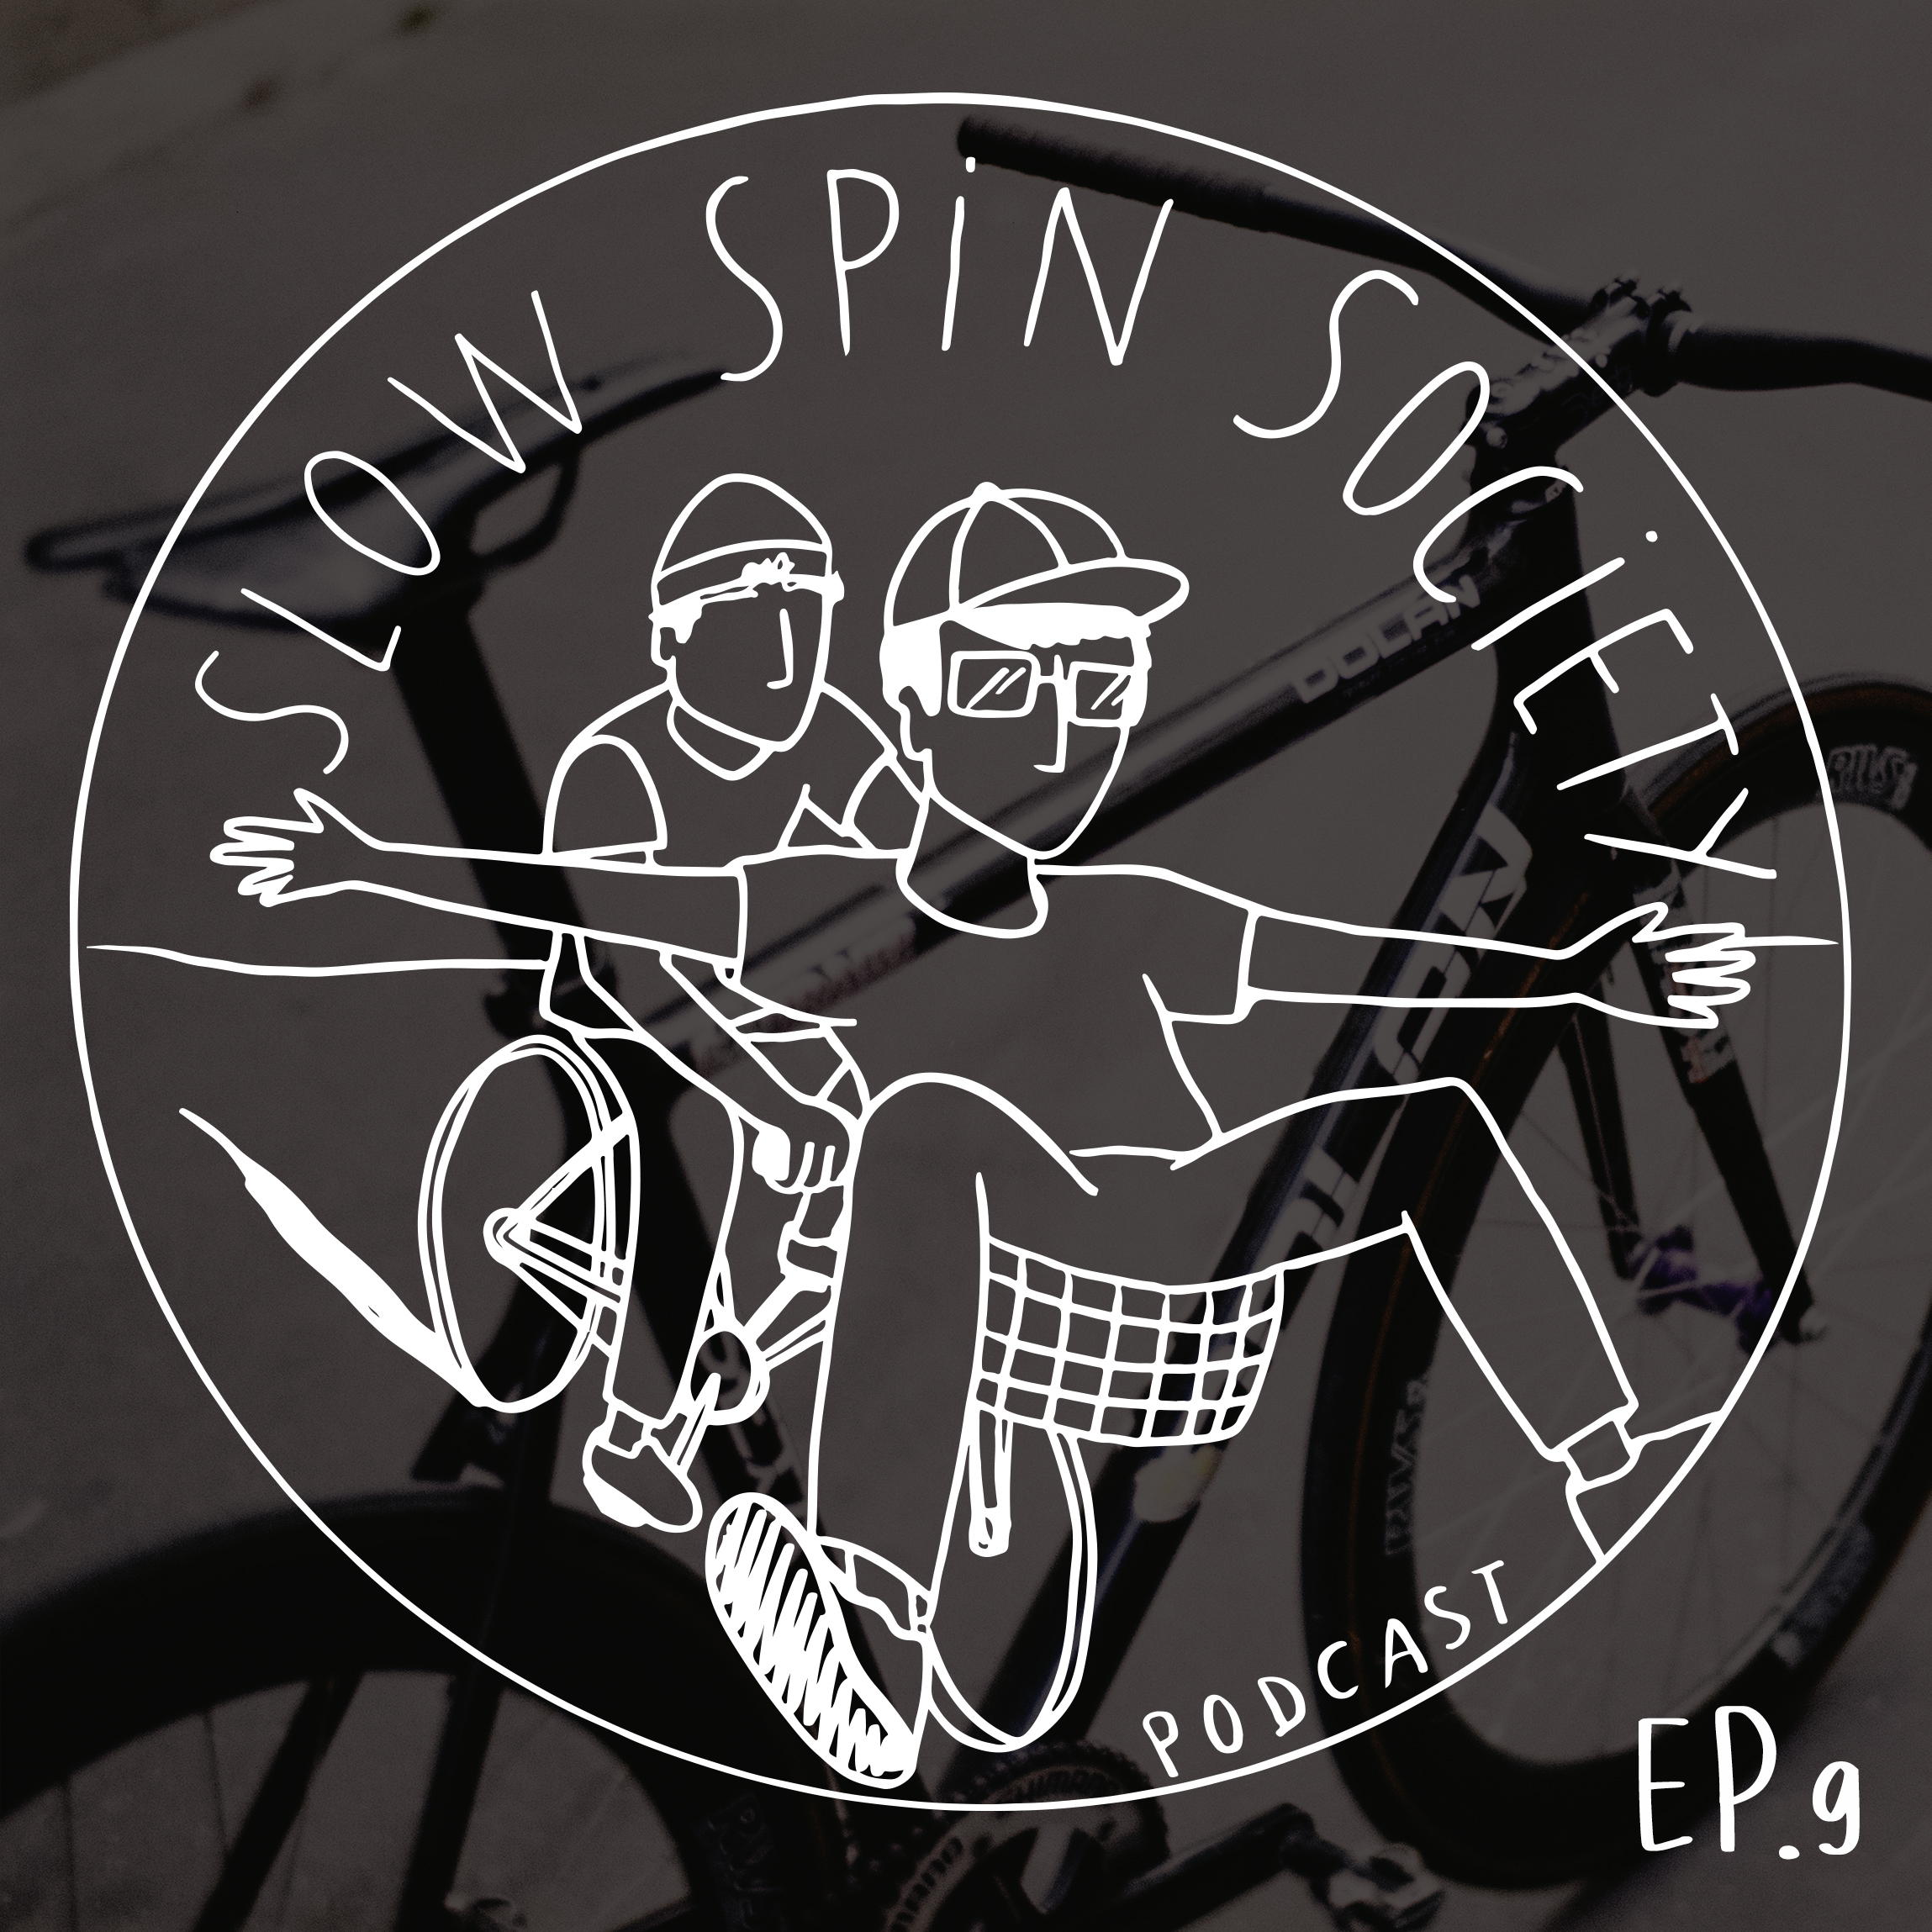 The Slow Spin Society Podcast Ep.9 : Innovations and Developments